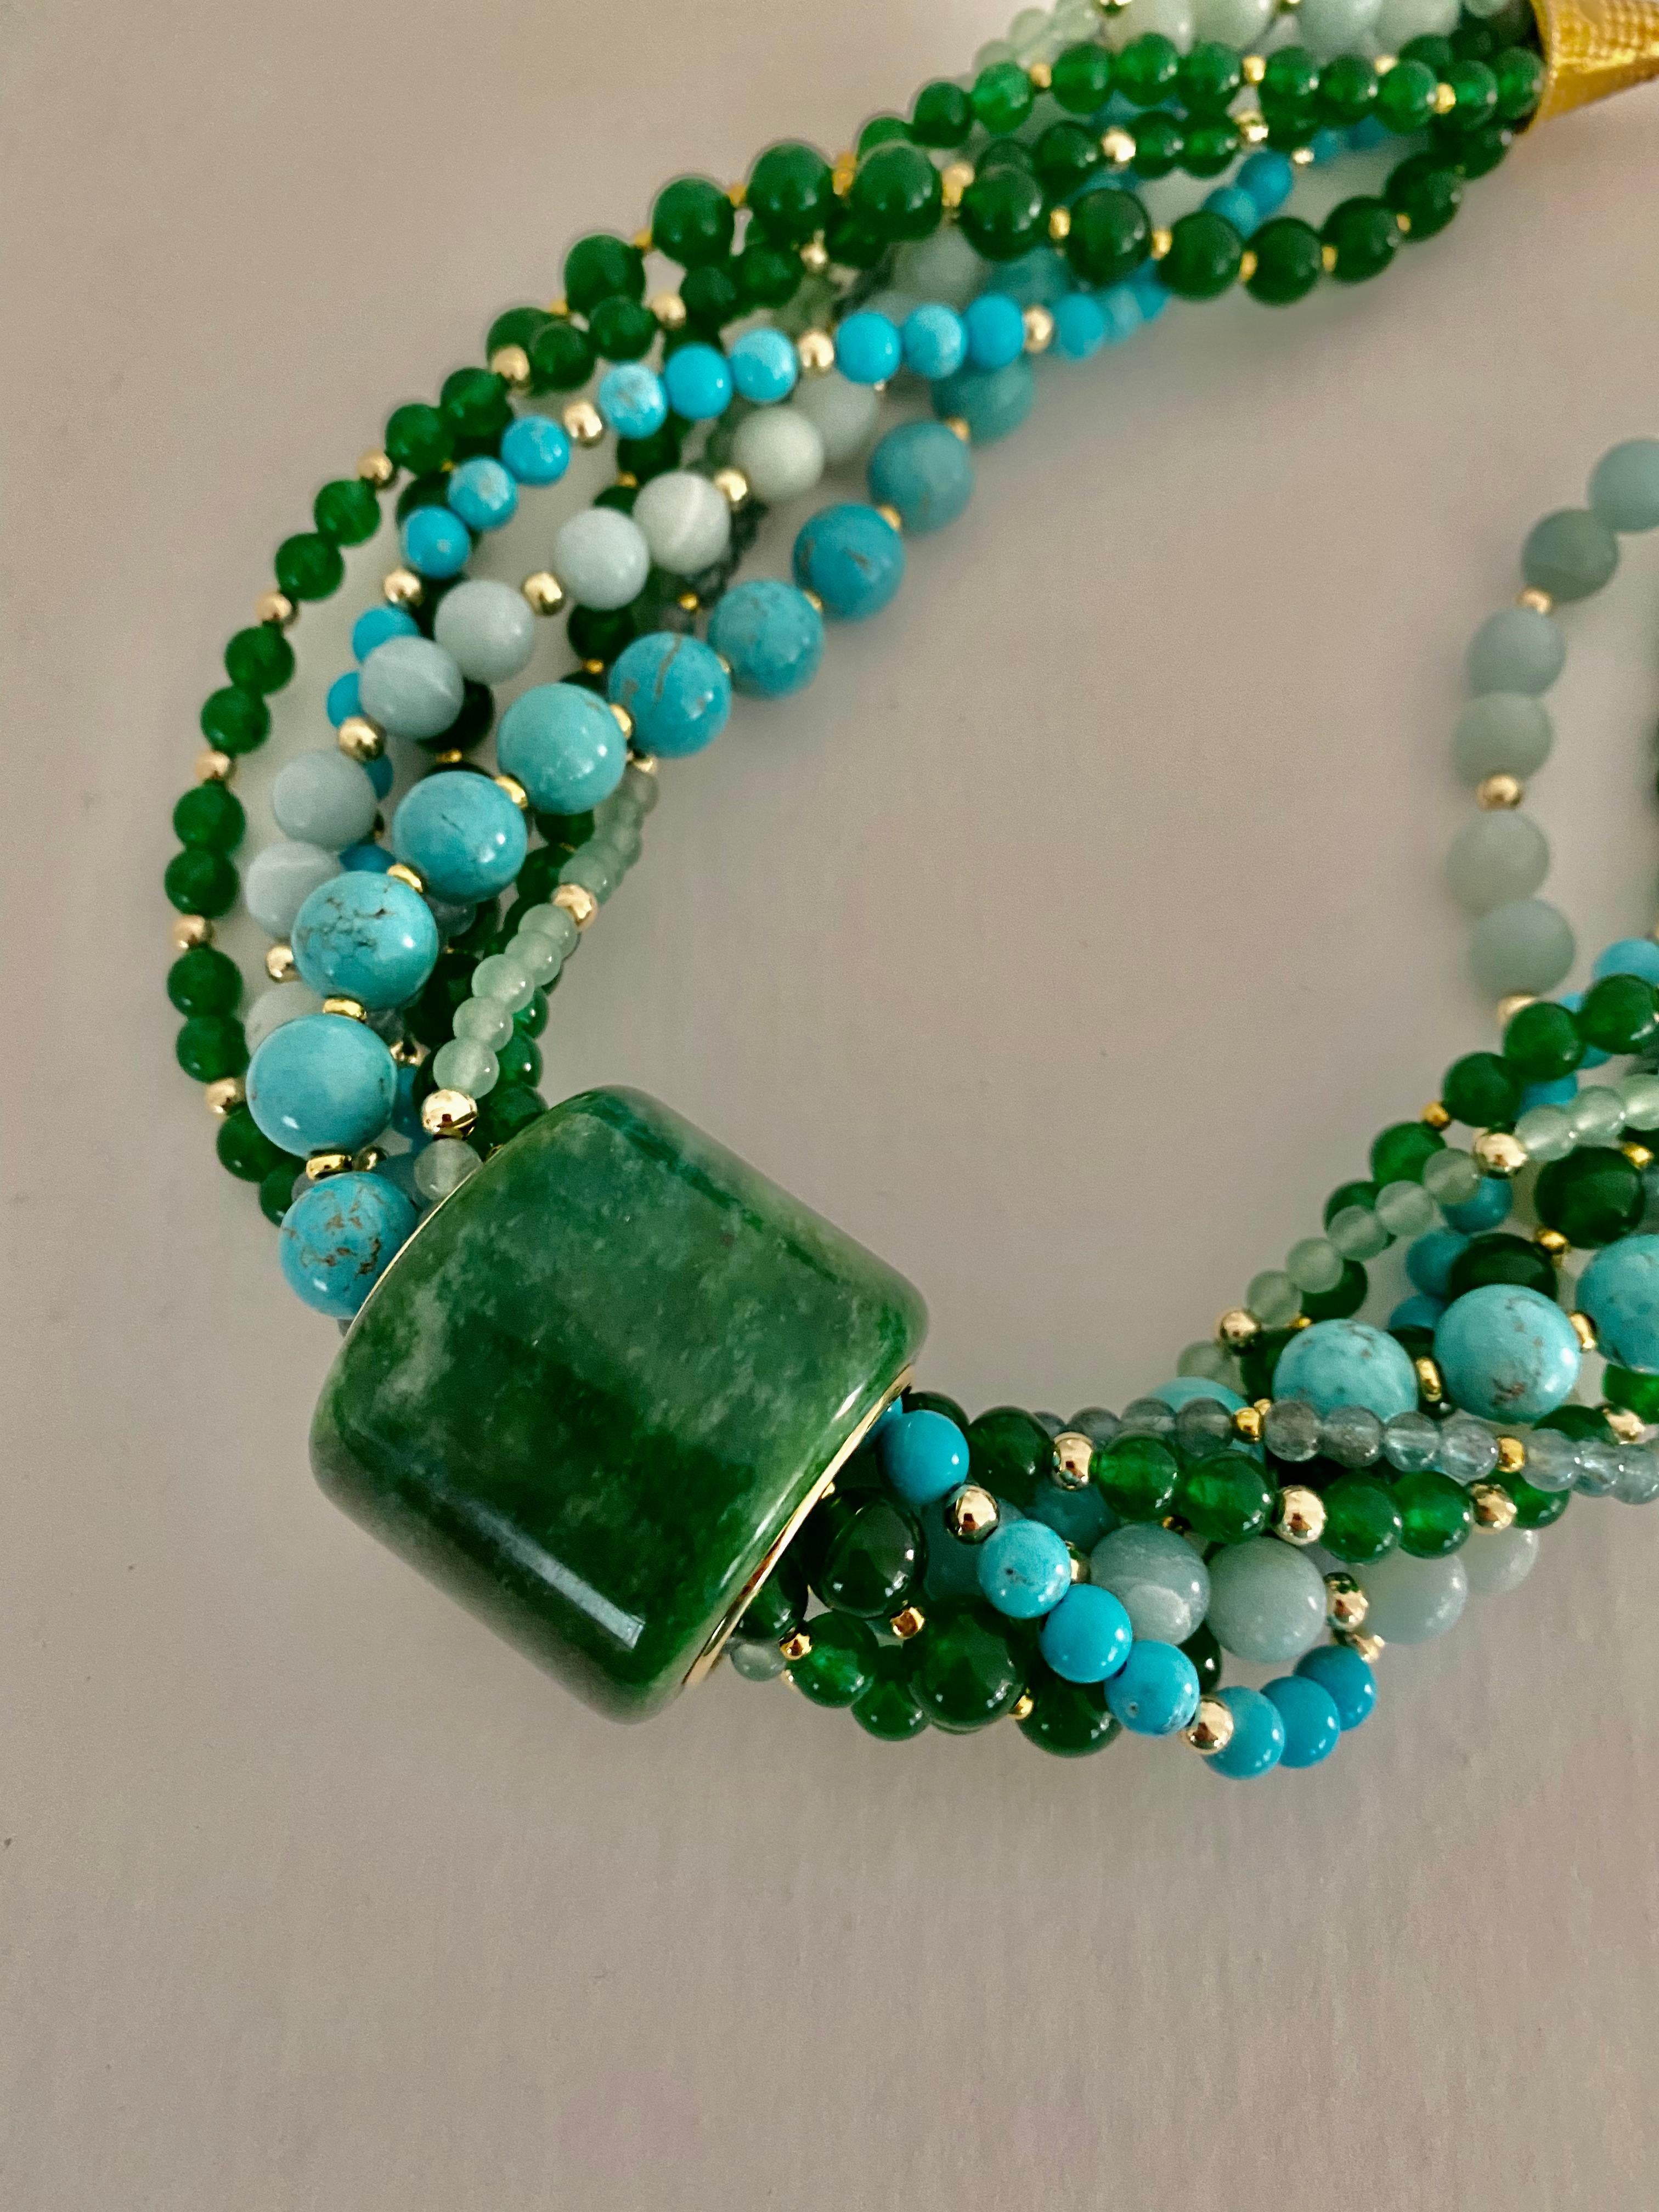 A Jadeite Archer's ring is the centerpiece of this multi-gemstone bead torsade necklace.  Jadeite (origin: Myanmar) is the supreme member of the larger jade family.  It is valued for its range of colors, hardness and durability.  Jadeite polishes to